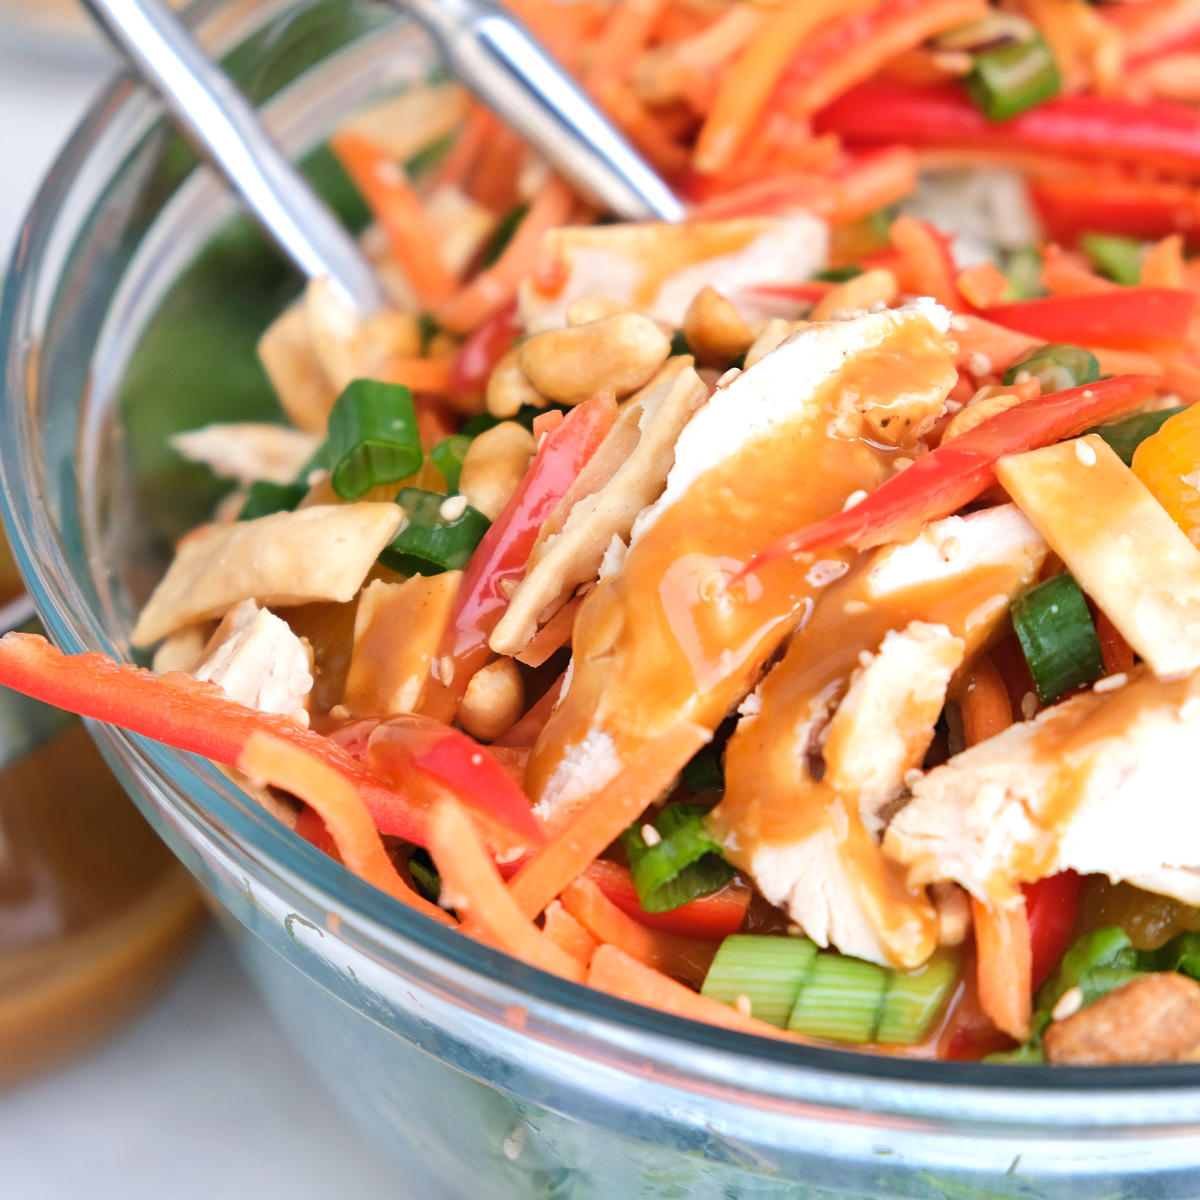 Healthy Chinese chicken salad with fresh veggies and a peanut dressing in a clear salad bowl.